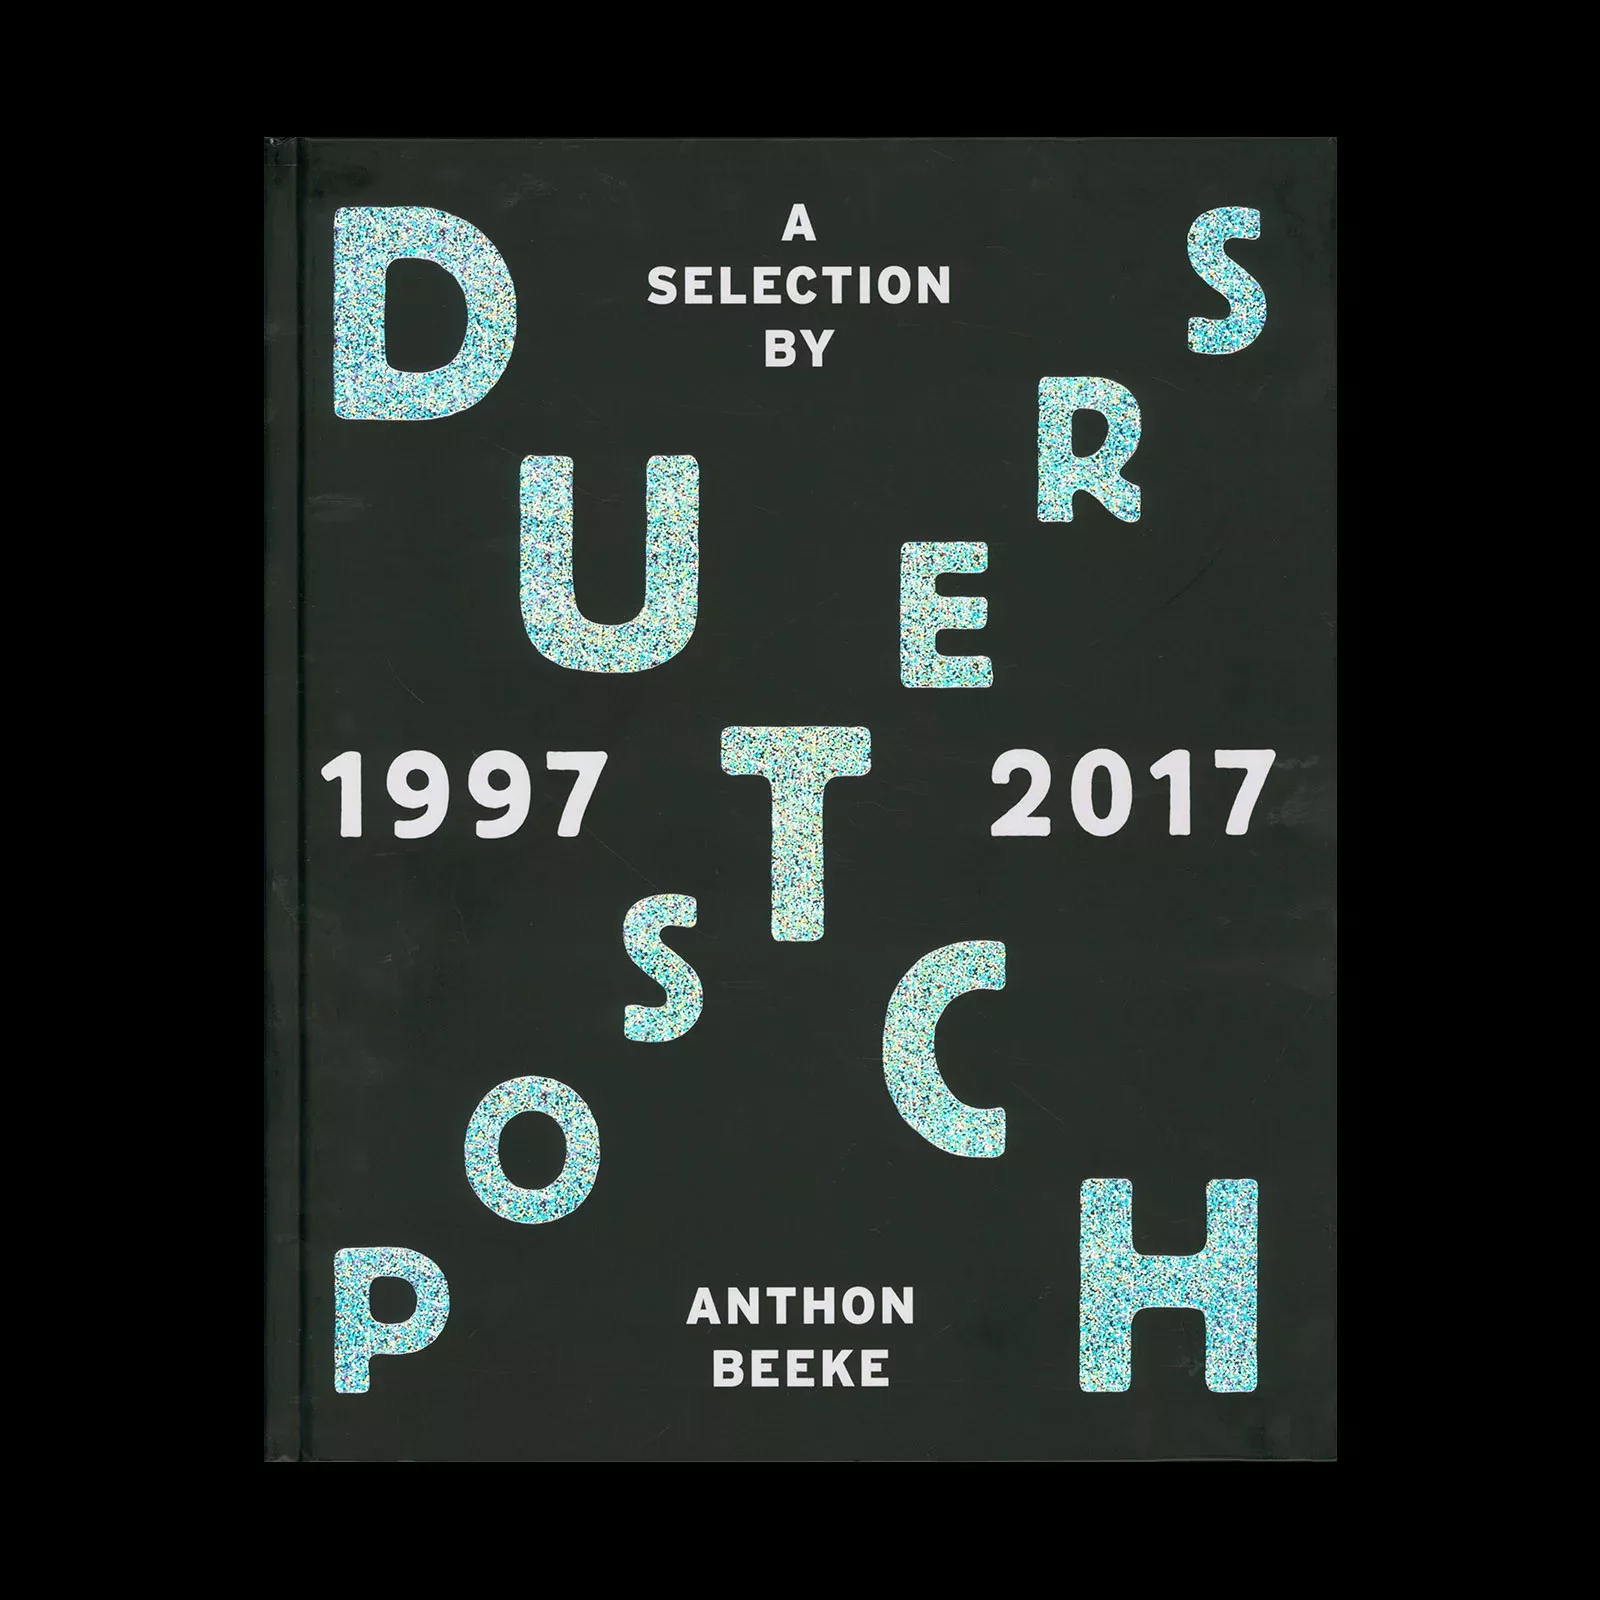 Dutch Posters 1997-2017 A Selection By Anthon Beeke, van Zoetendaal, 2018